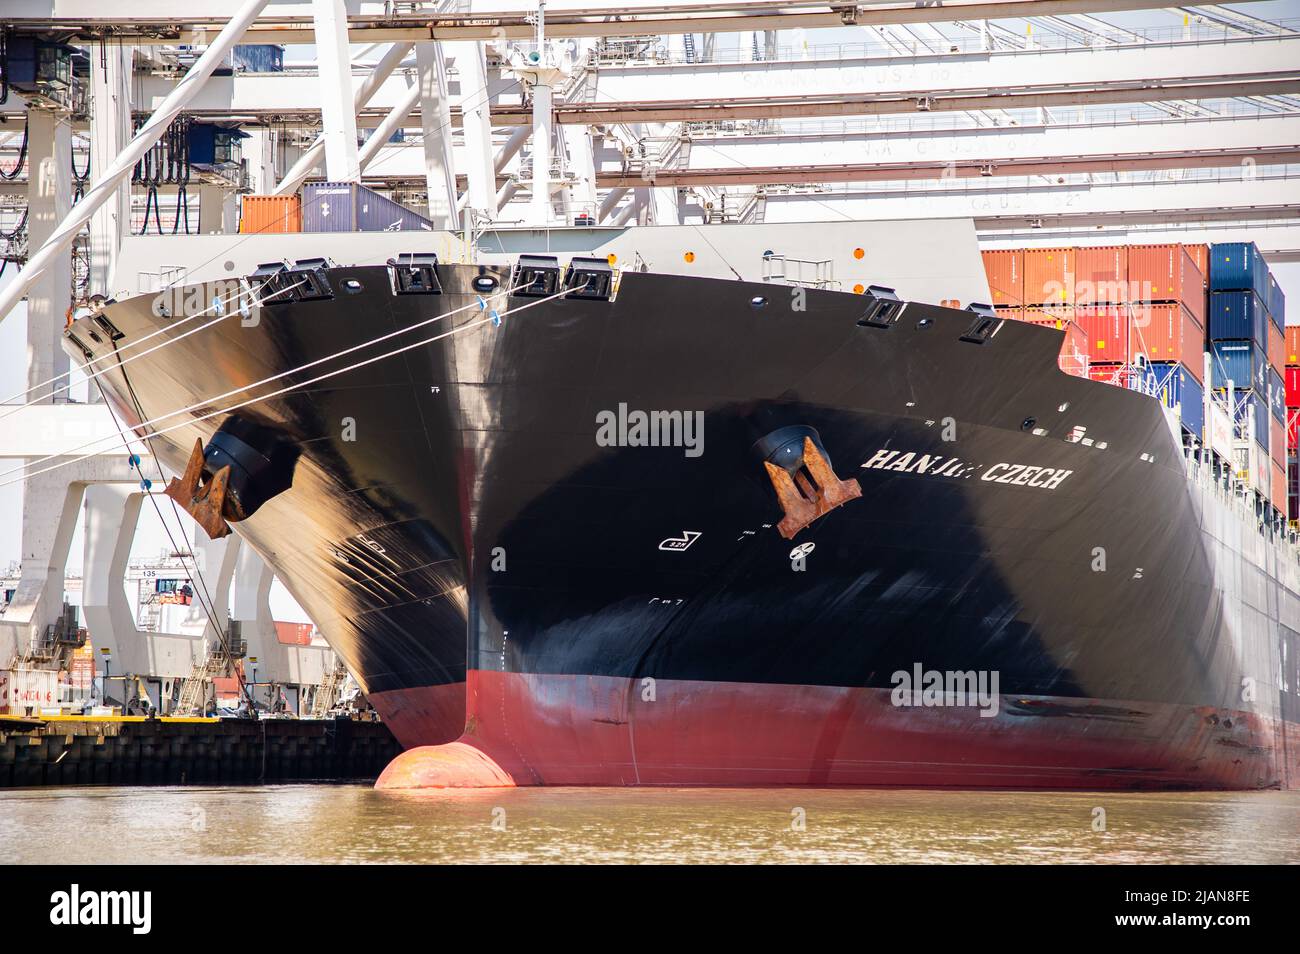 Stock images of the COSCO Development container ship, the largest vessel to ever call the East Coast, entered the  Savannah River this morning and mak Stock Photo